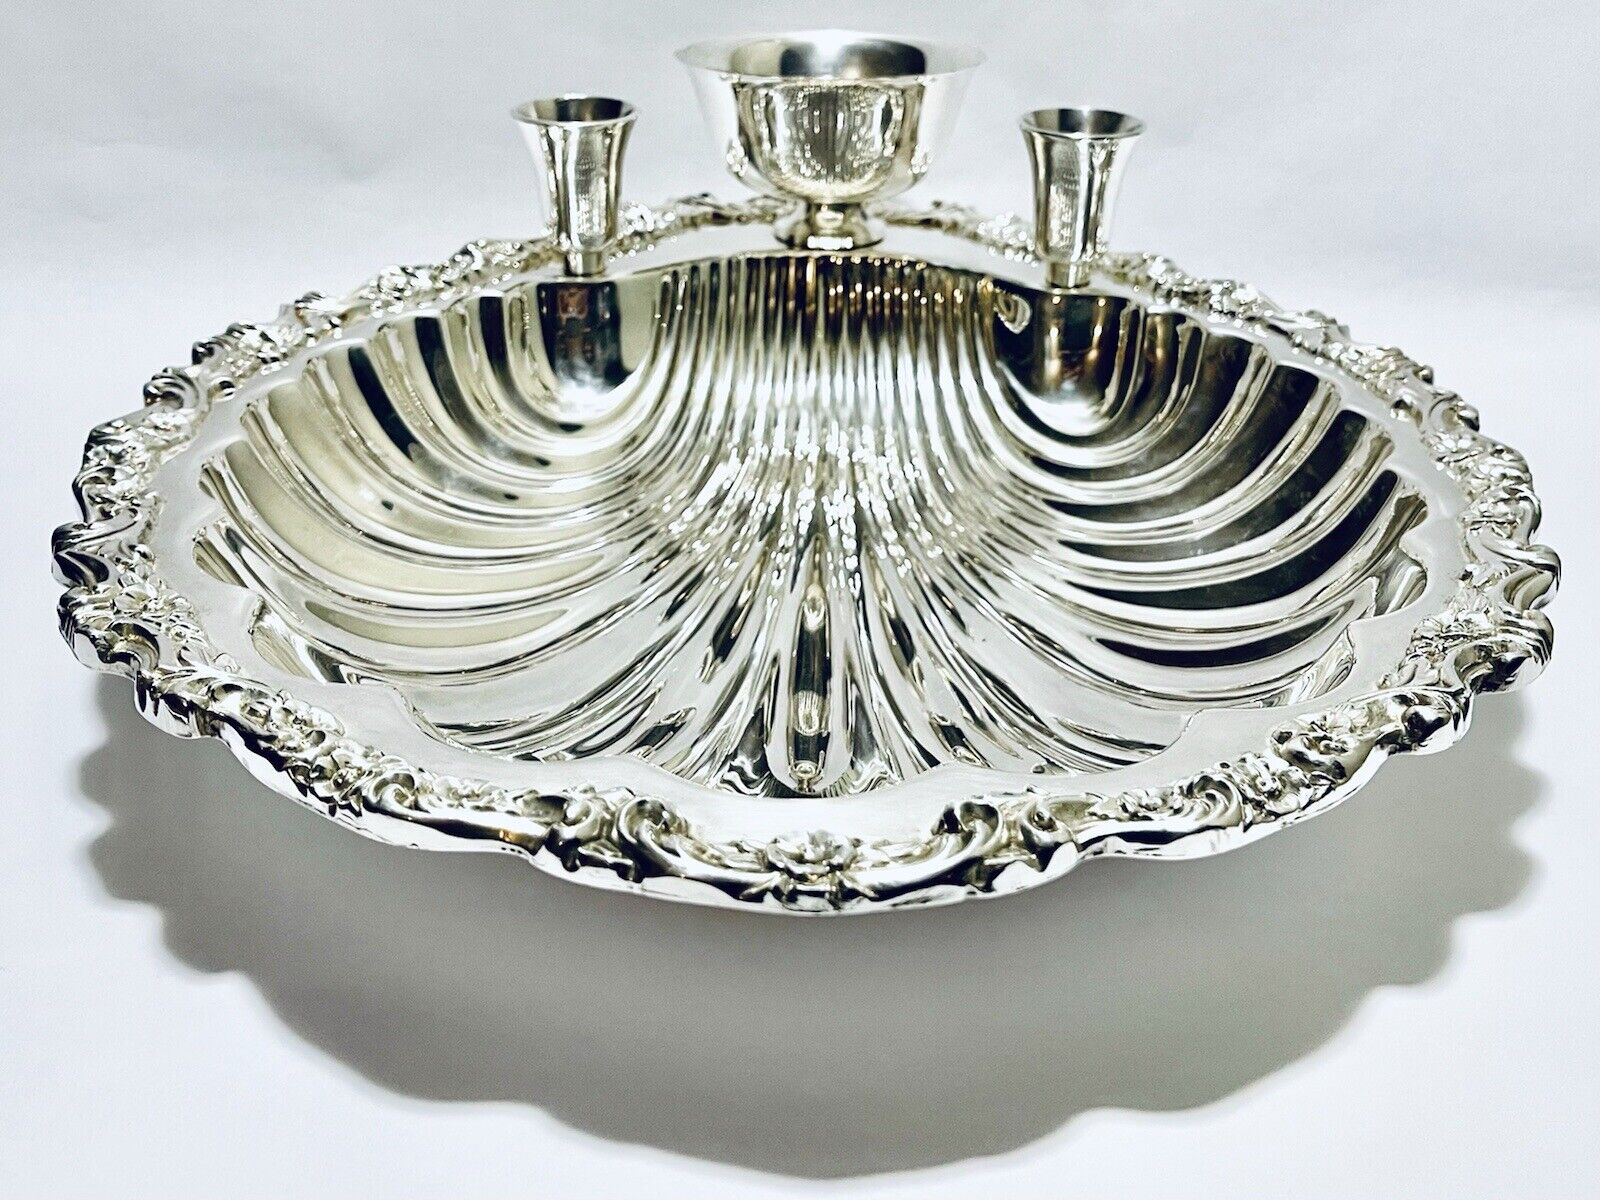 Fabulous Vintage Very Ornate Scalloped Serving Bowl International Silver Plated